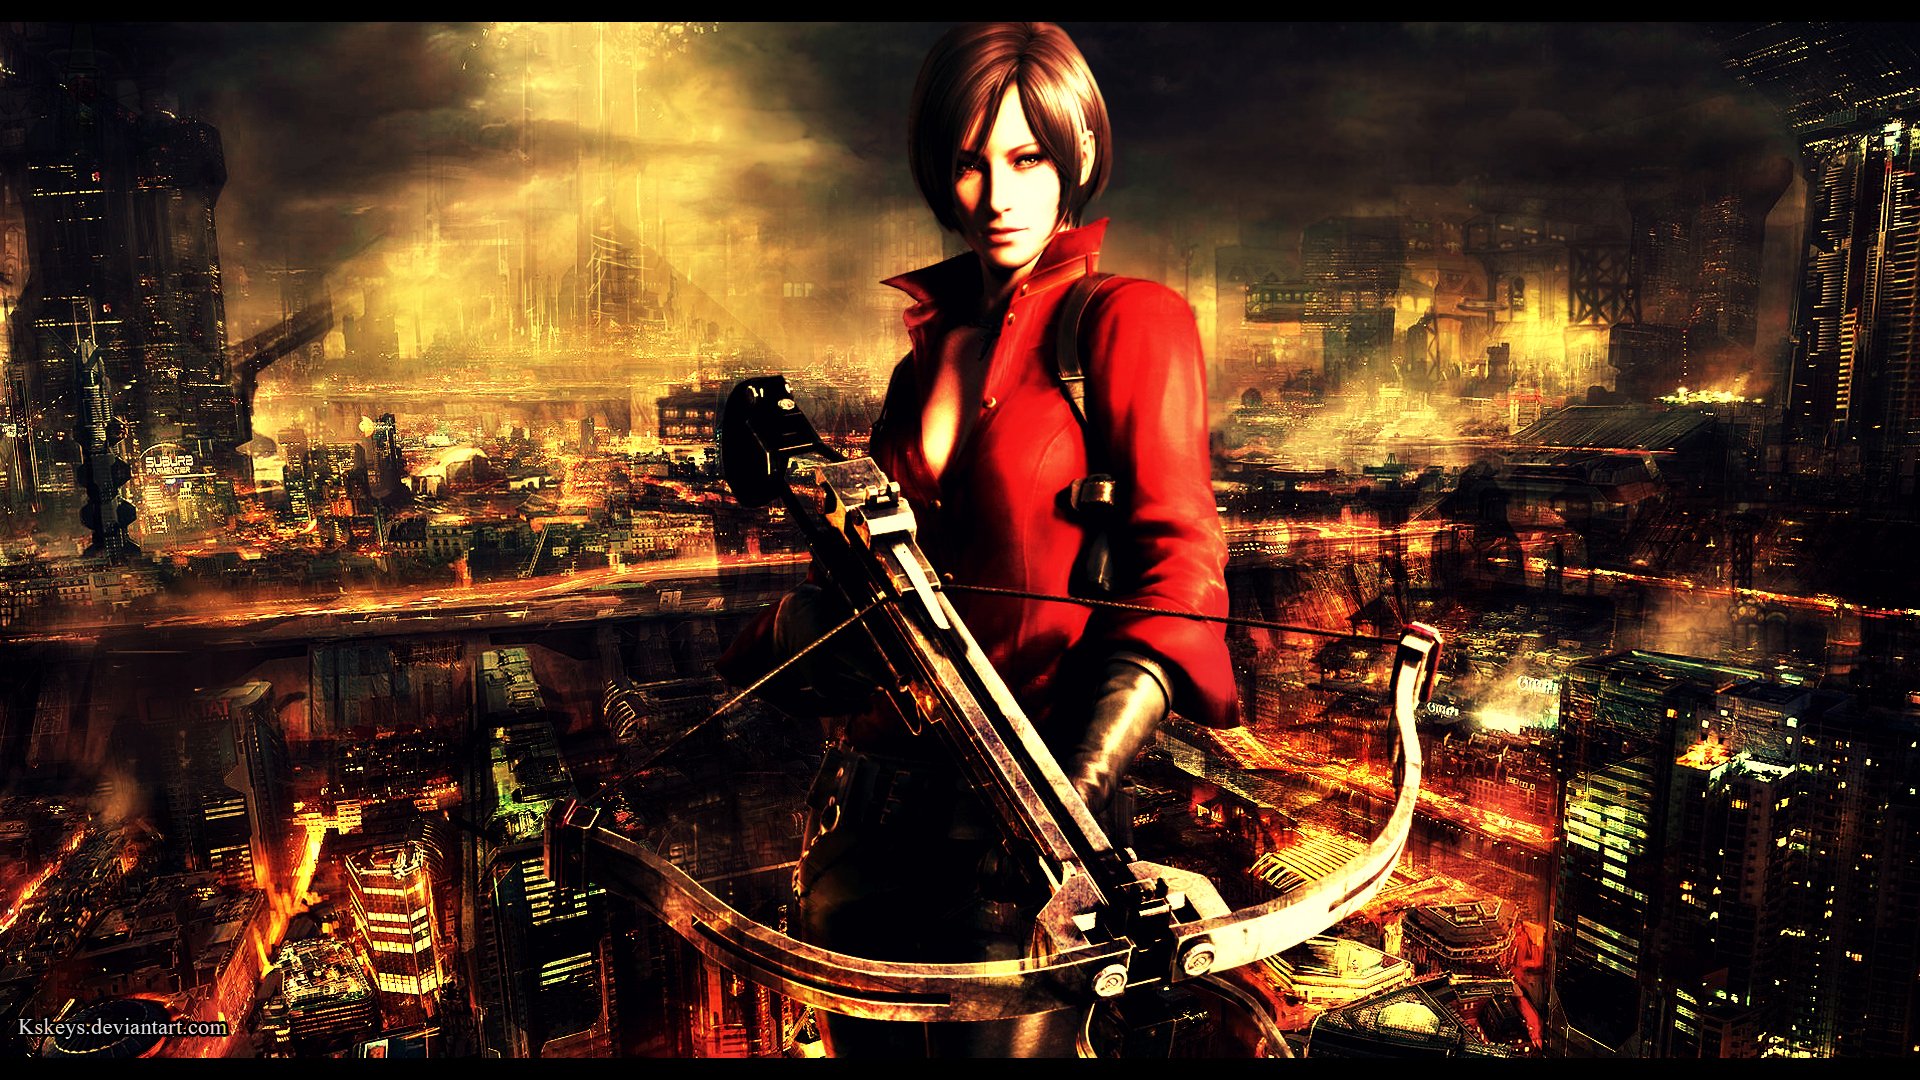 Ada Wong Resident Evil 6 Resident Evil Video Game Characters Video Game Girls Crossbow Red Dress Vid 1920x1080